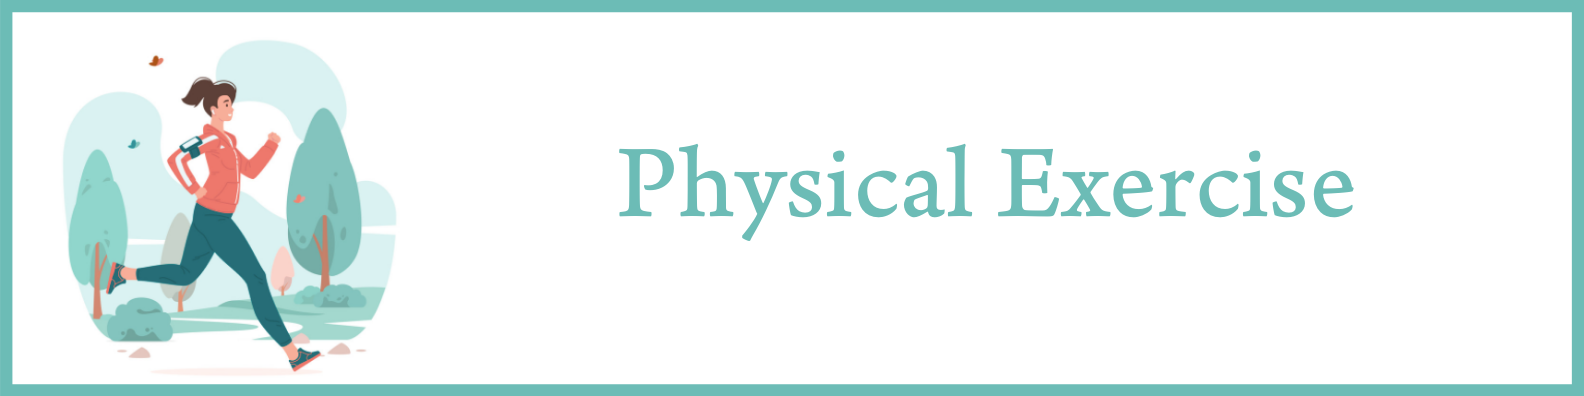 Physical Exercise Banner